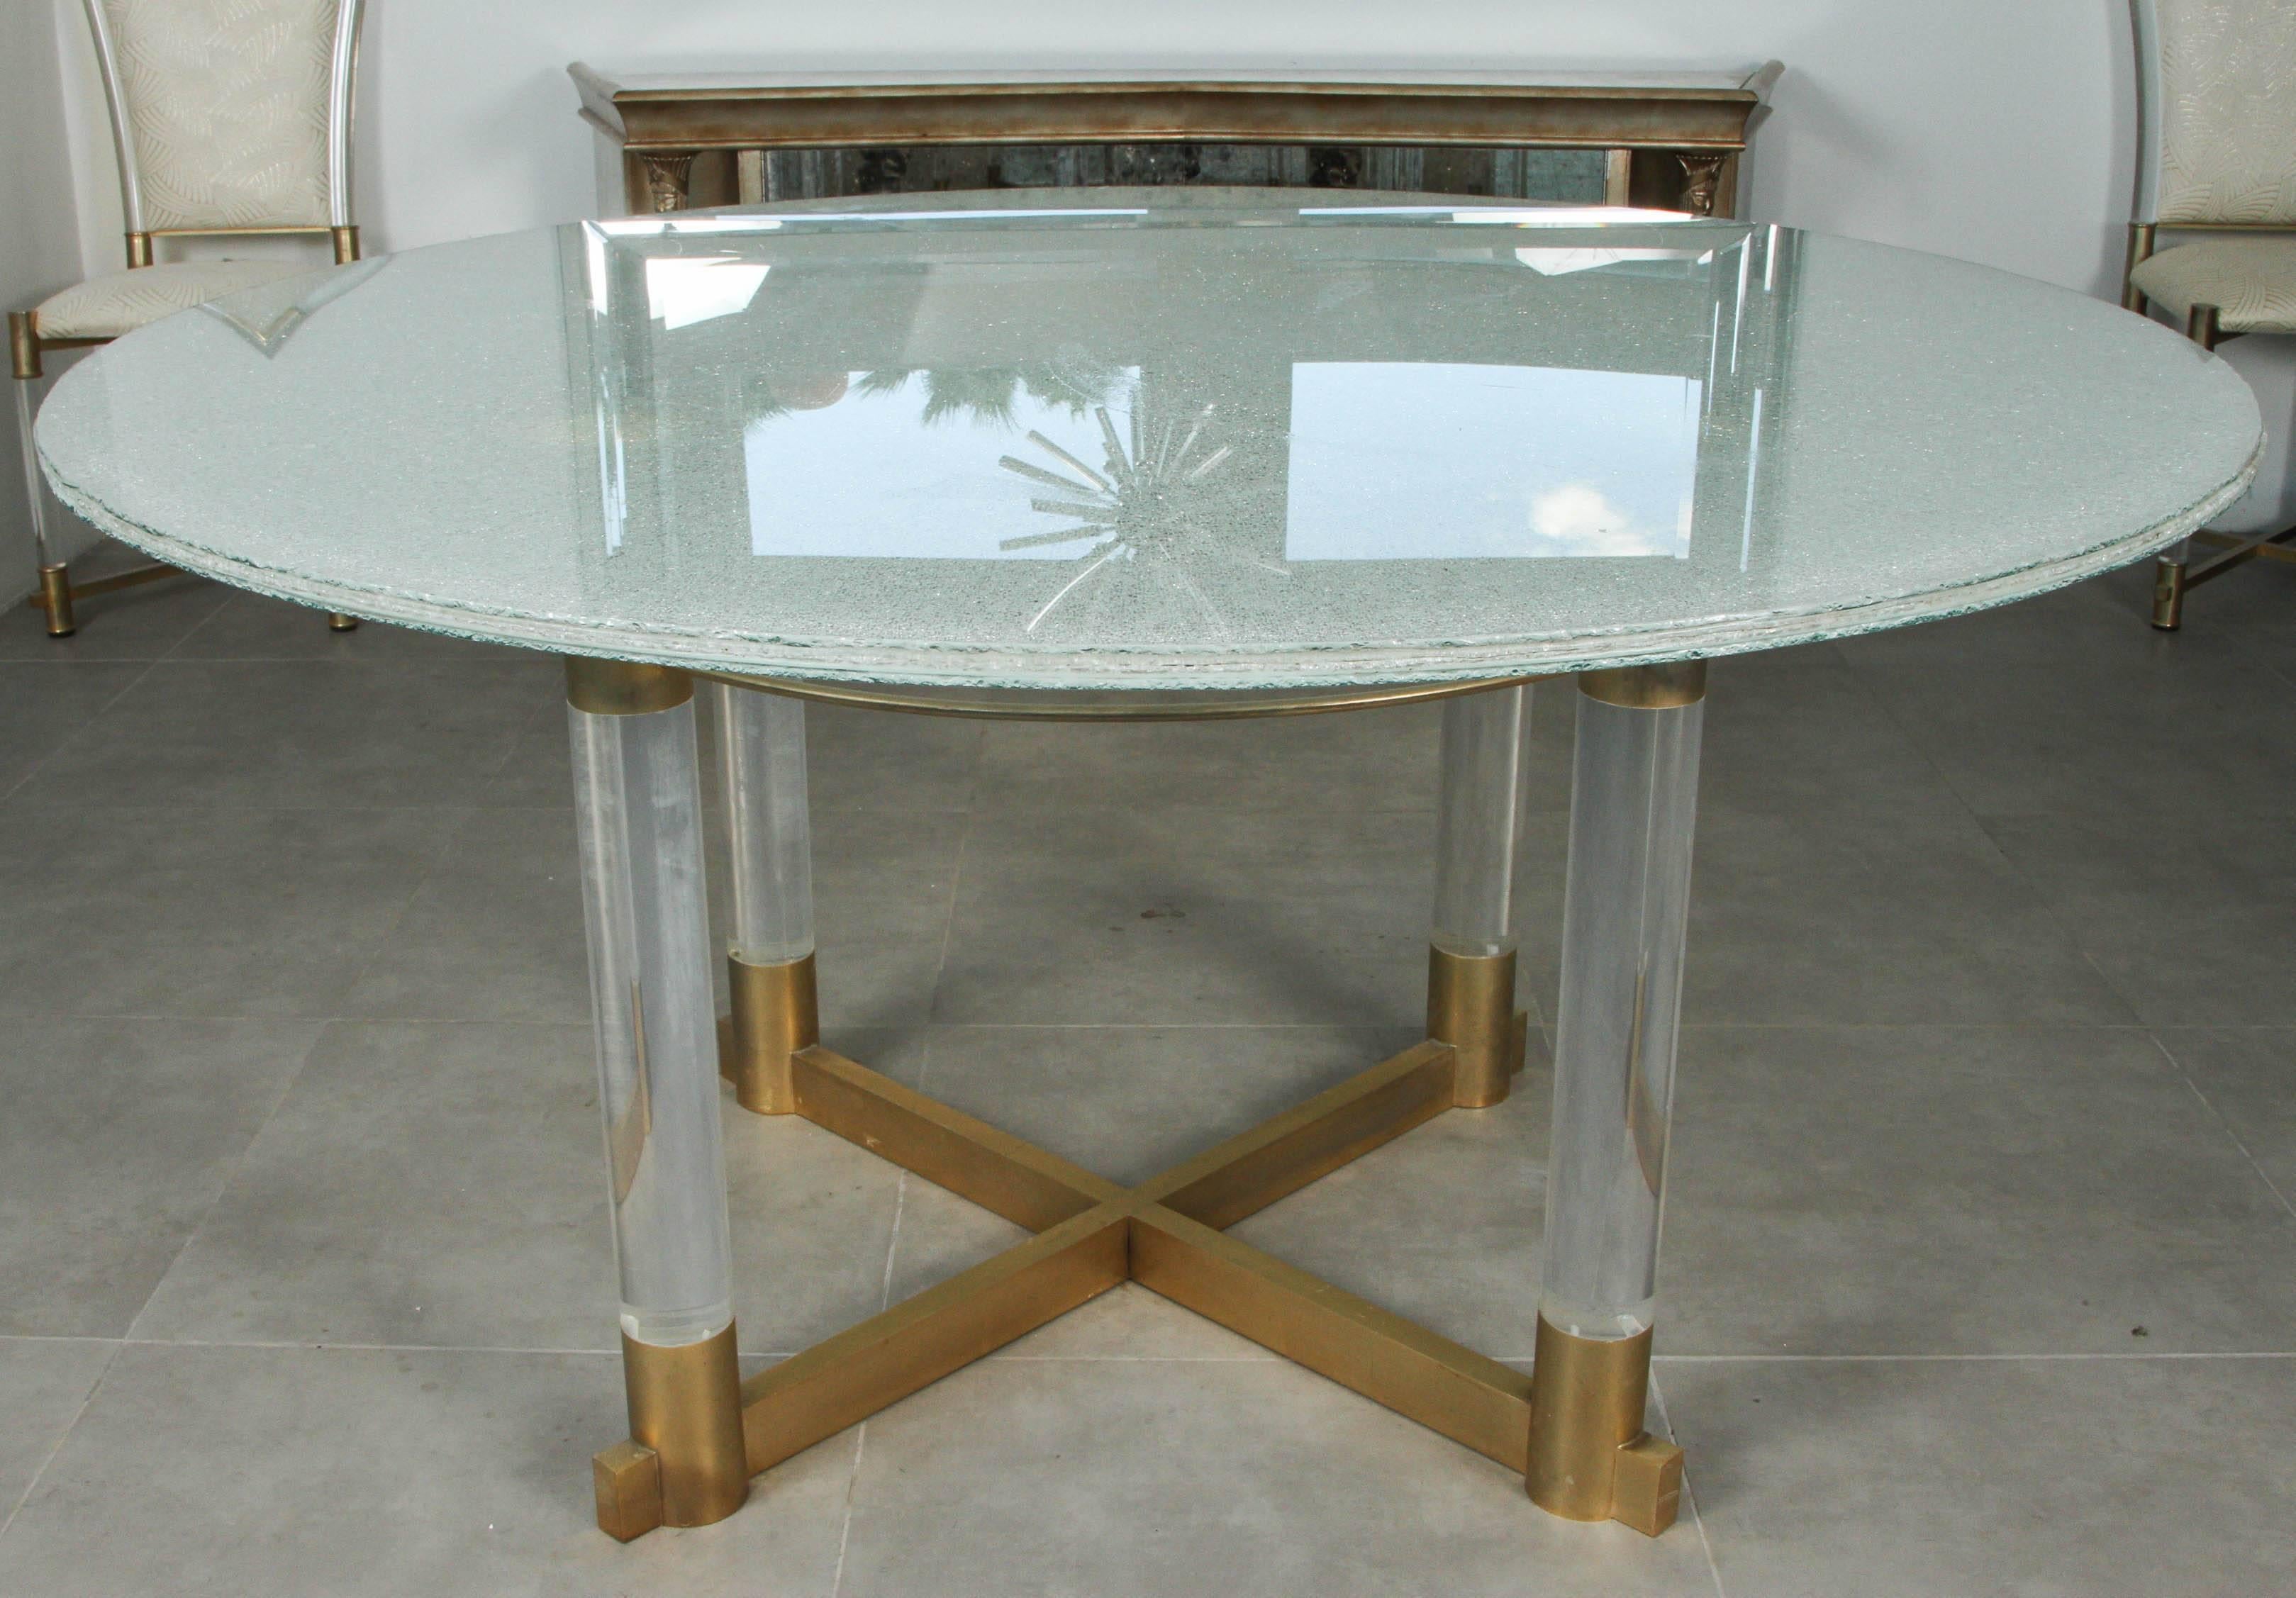 Crackled glass dining table with a base of thick lucite cylinders and brass fittings.